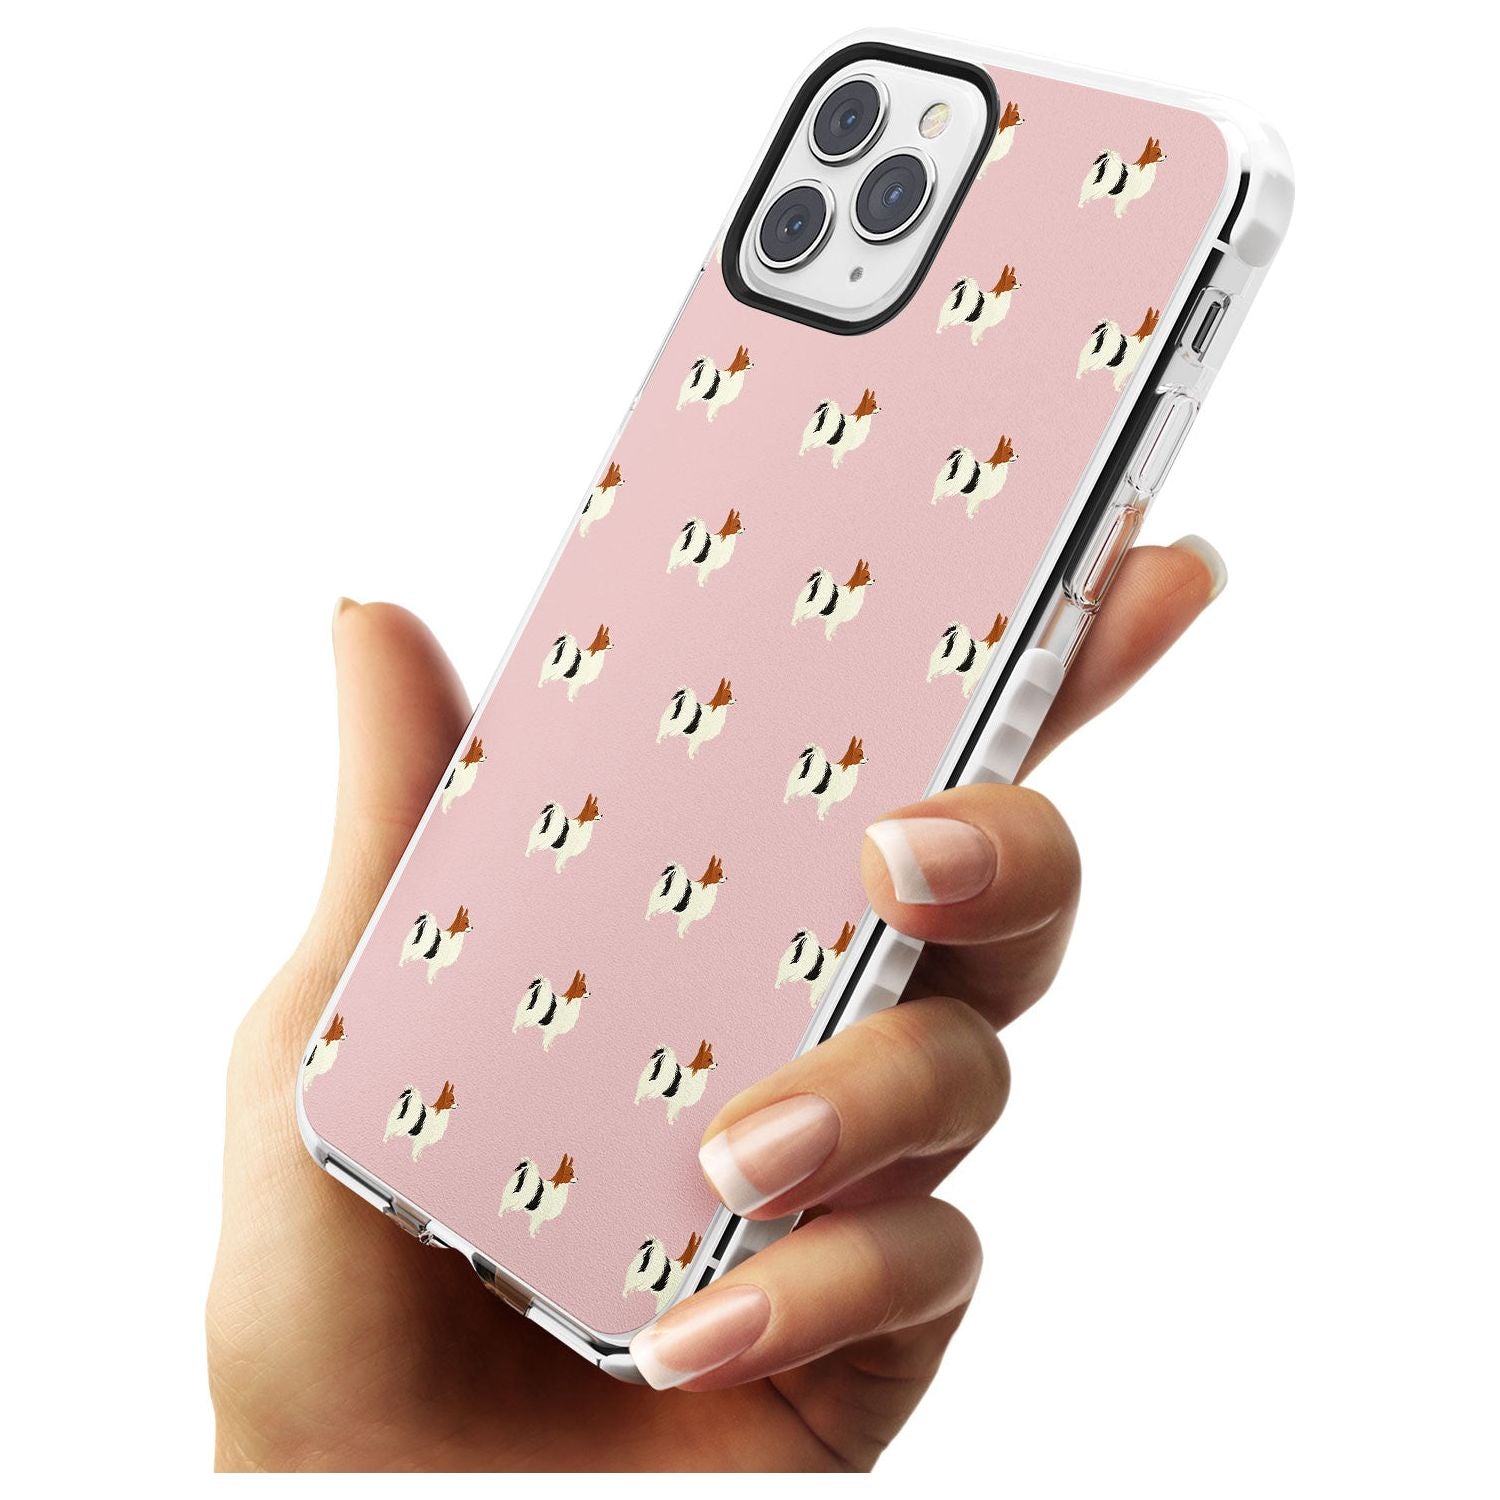 Papillon Dog Pattern Impact Phone Case for iPhone 11 Pro Max